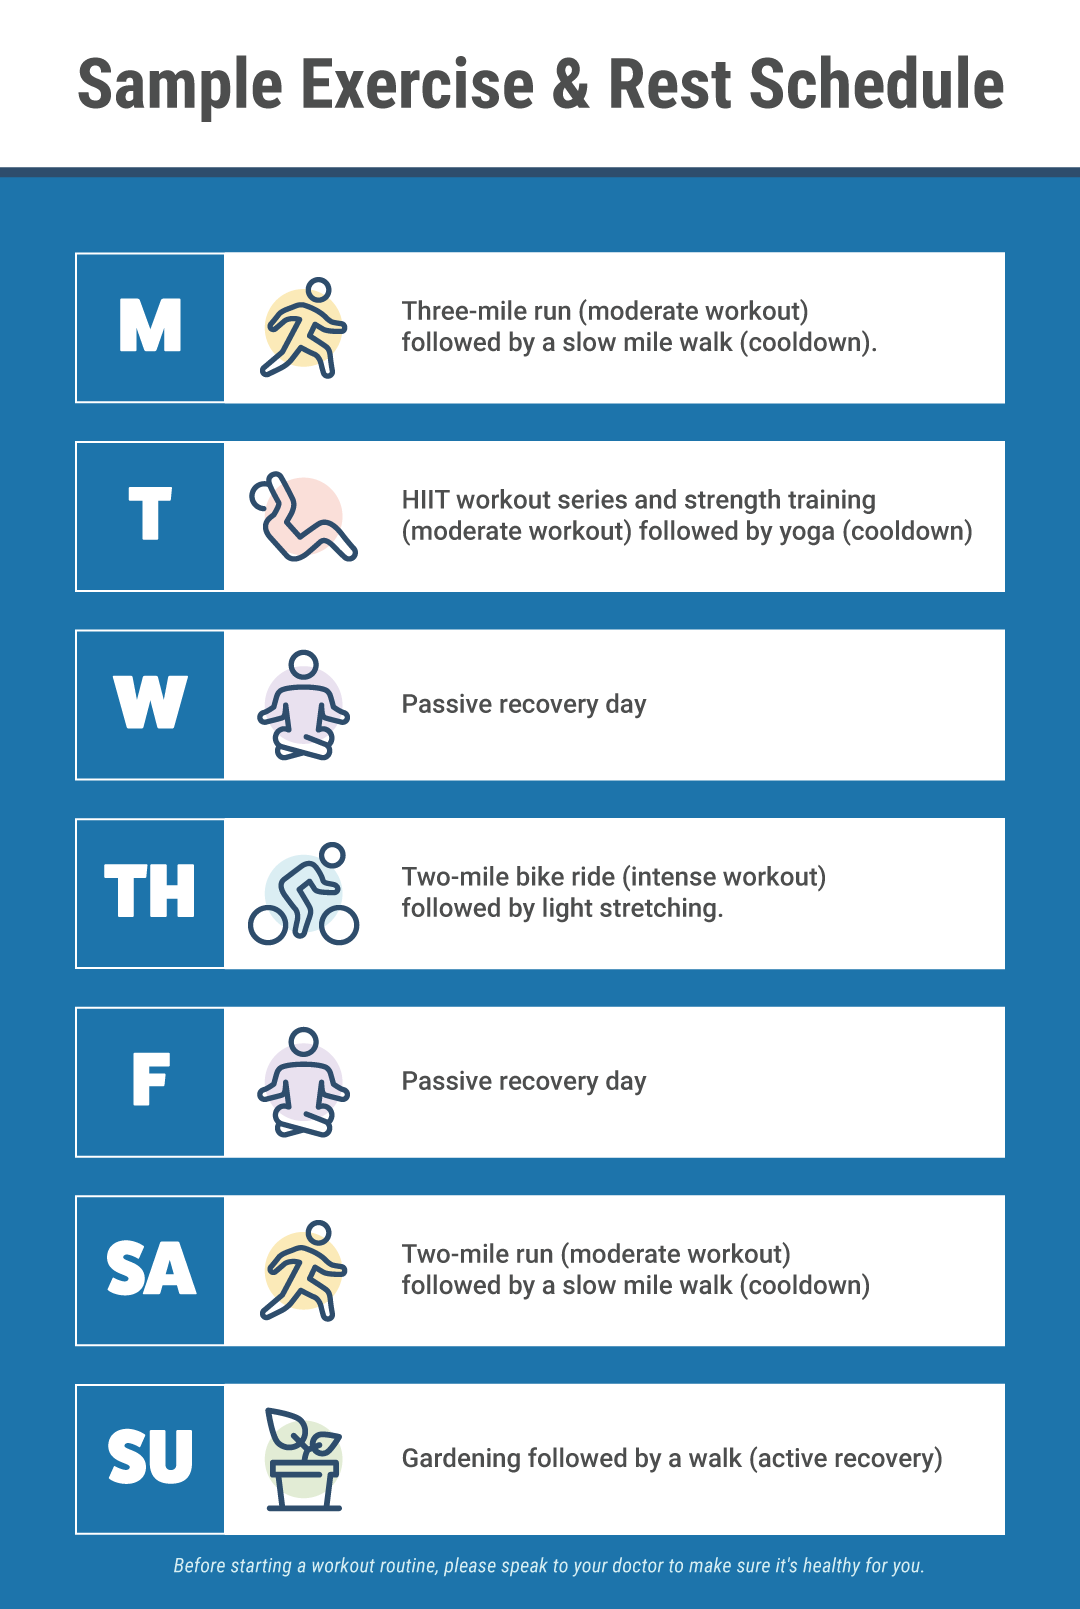 Ways Seniors Can Recover from a Workout